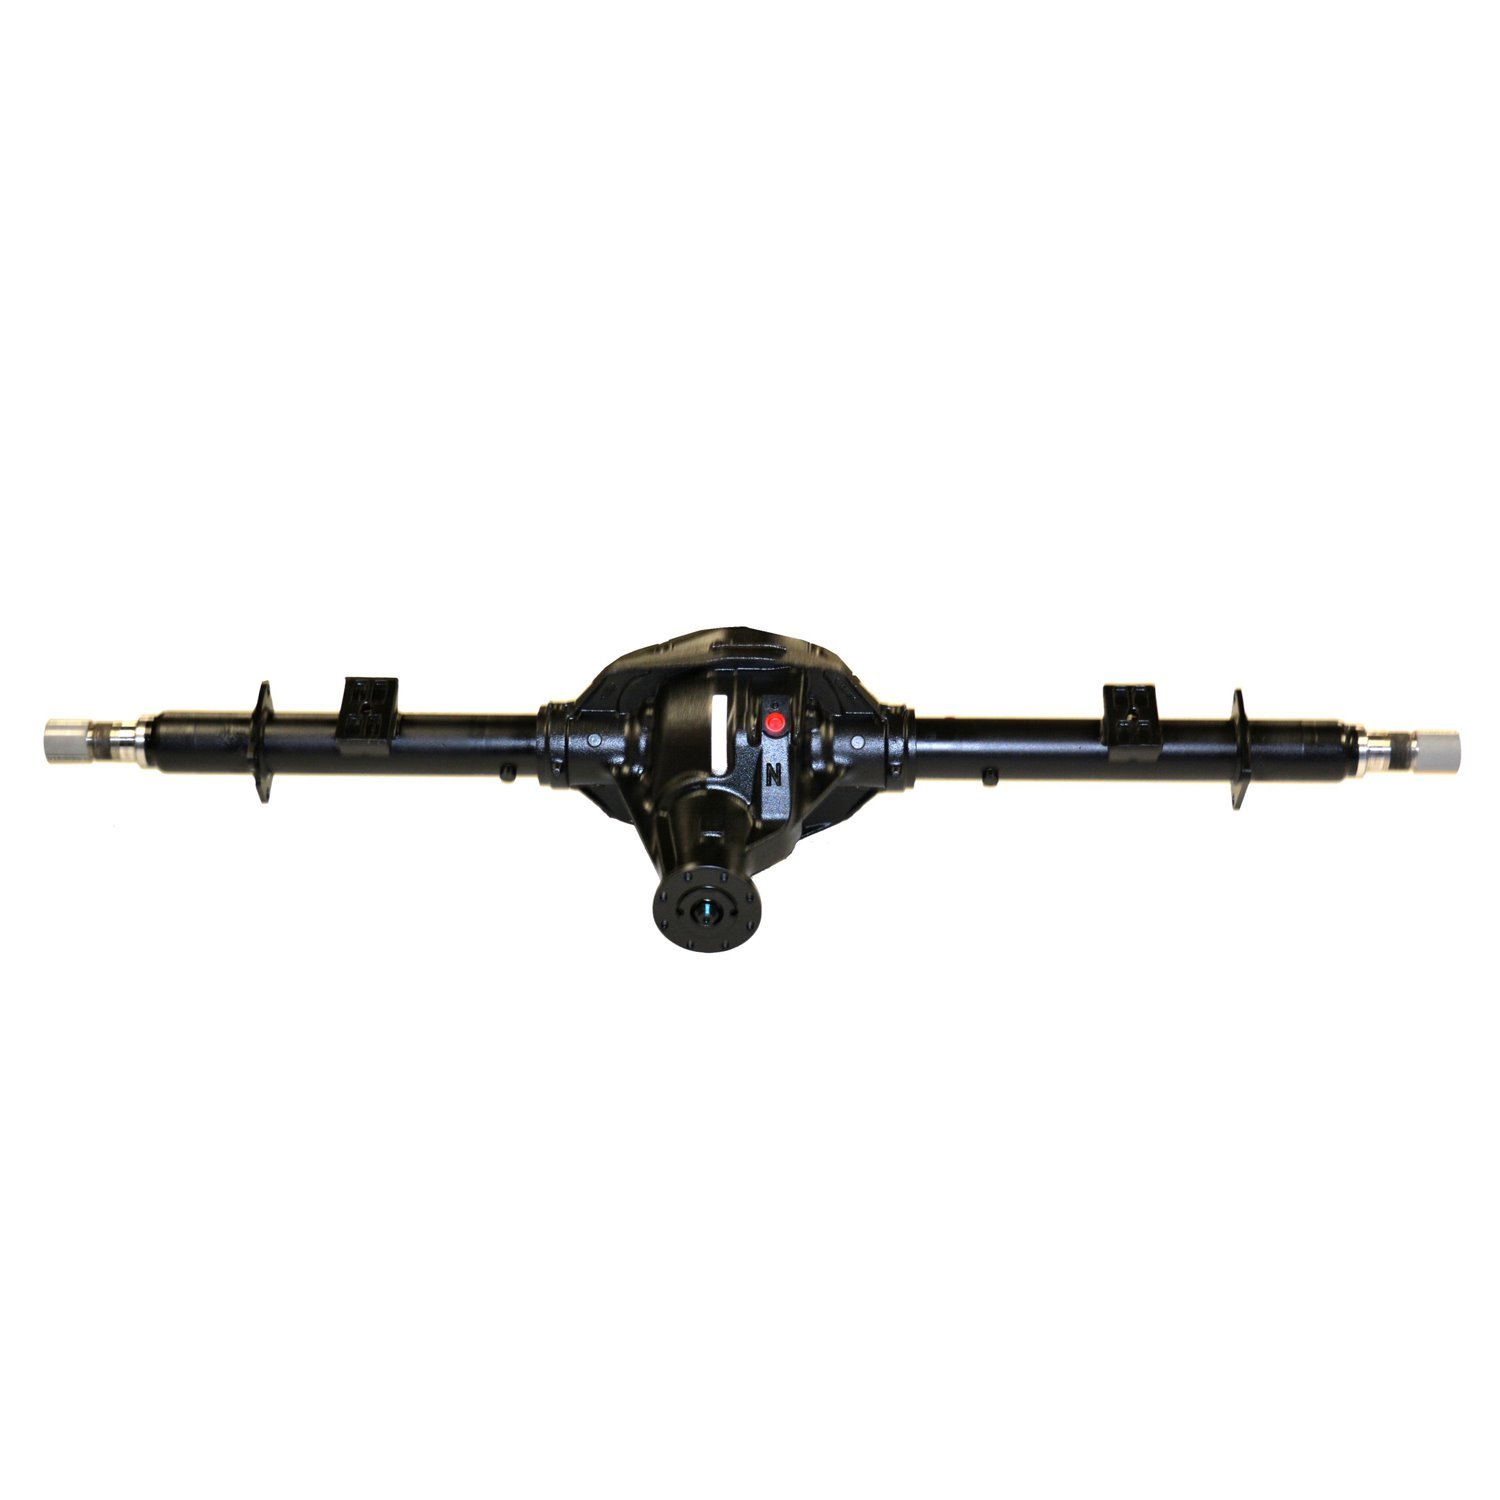 Remanufactured Complete Axle Assy for 10.25" 87-97 F350 4.11 , DRW, ABS, Cab & Chassis